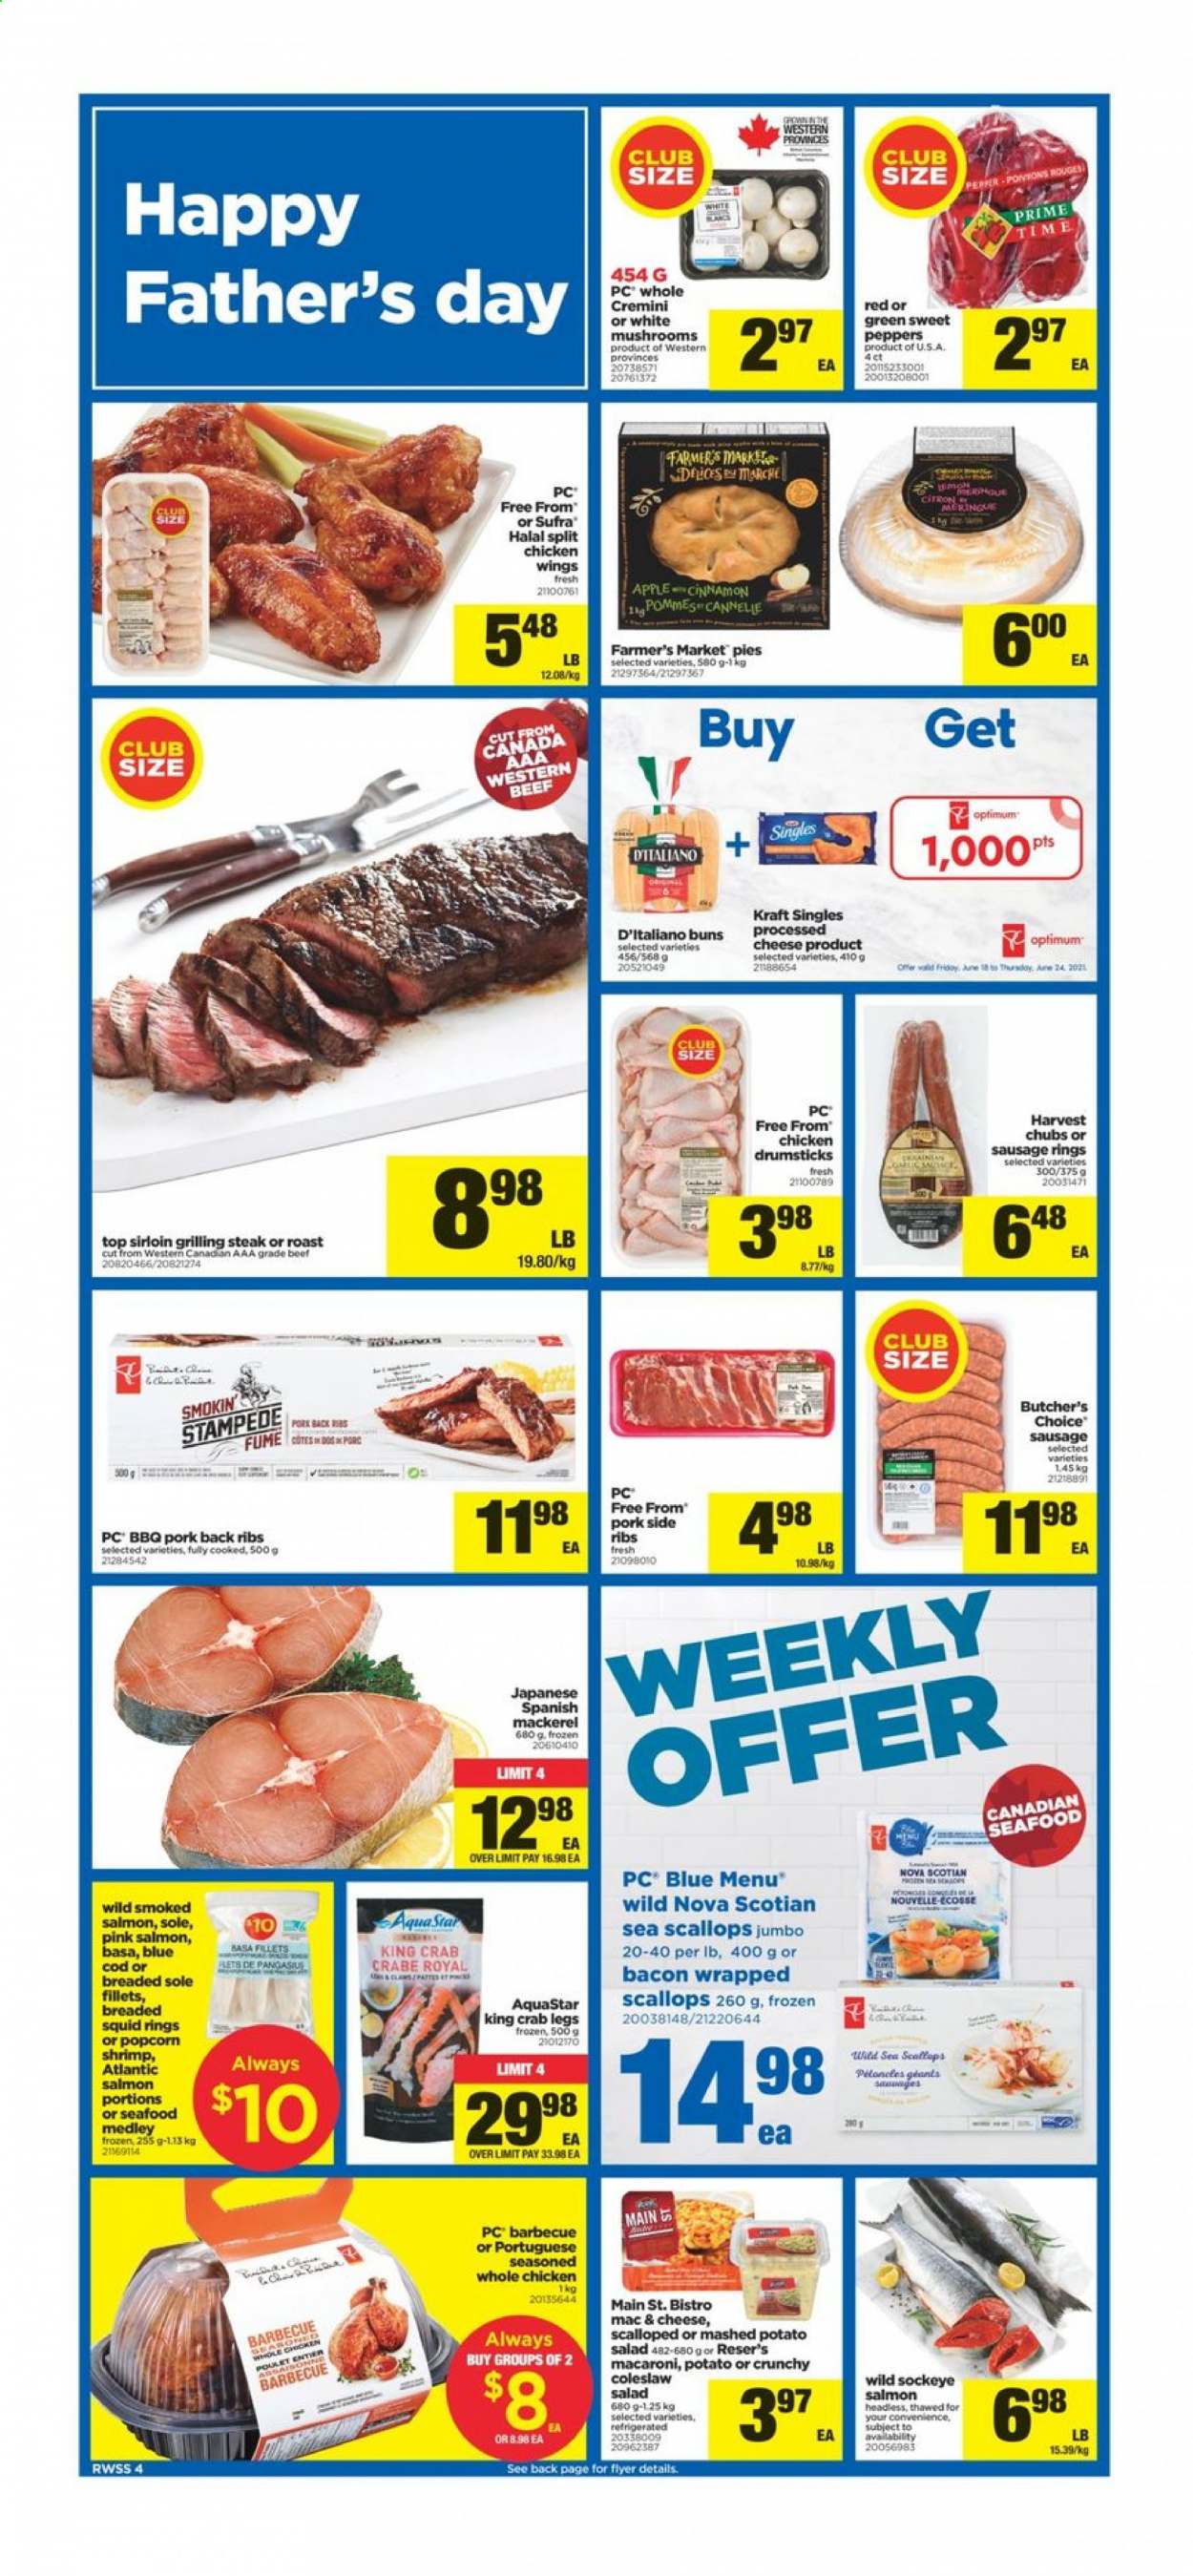 thumbnail - Real Canadian Superstore Flyer - June 18, 2021 - June 24, 2021 - Sales products - mushrooms, buns, salad, peppers, bacon wrapped scallops, cod, mackerel, salmon, scallops, squid, king crab, seafood, crab legs, crab, shrimps, squid rings, coleslaw, macaroni, Kraft®, bacon, sausage, potato salad, sandwich slices, Kraft Singles, chicken wings, cinnamon, whole chicken, chicken drumsticks, chicken, pork meat, pork ribs, pork back ribs, nappies, Optimum, steak. Page 6.